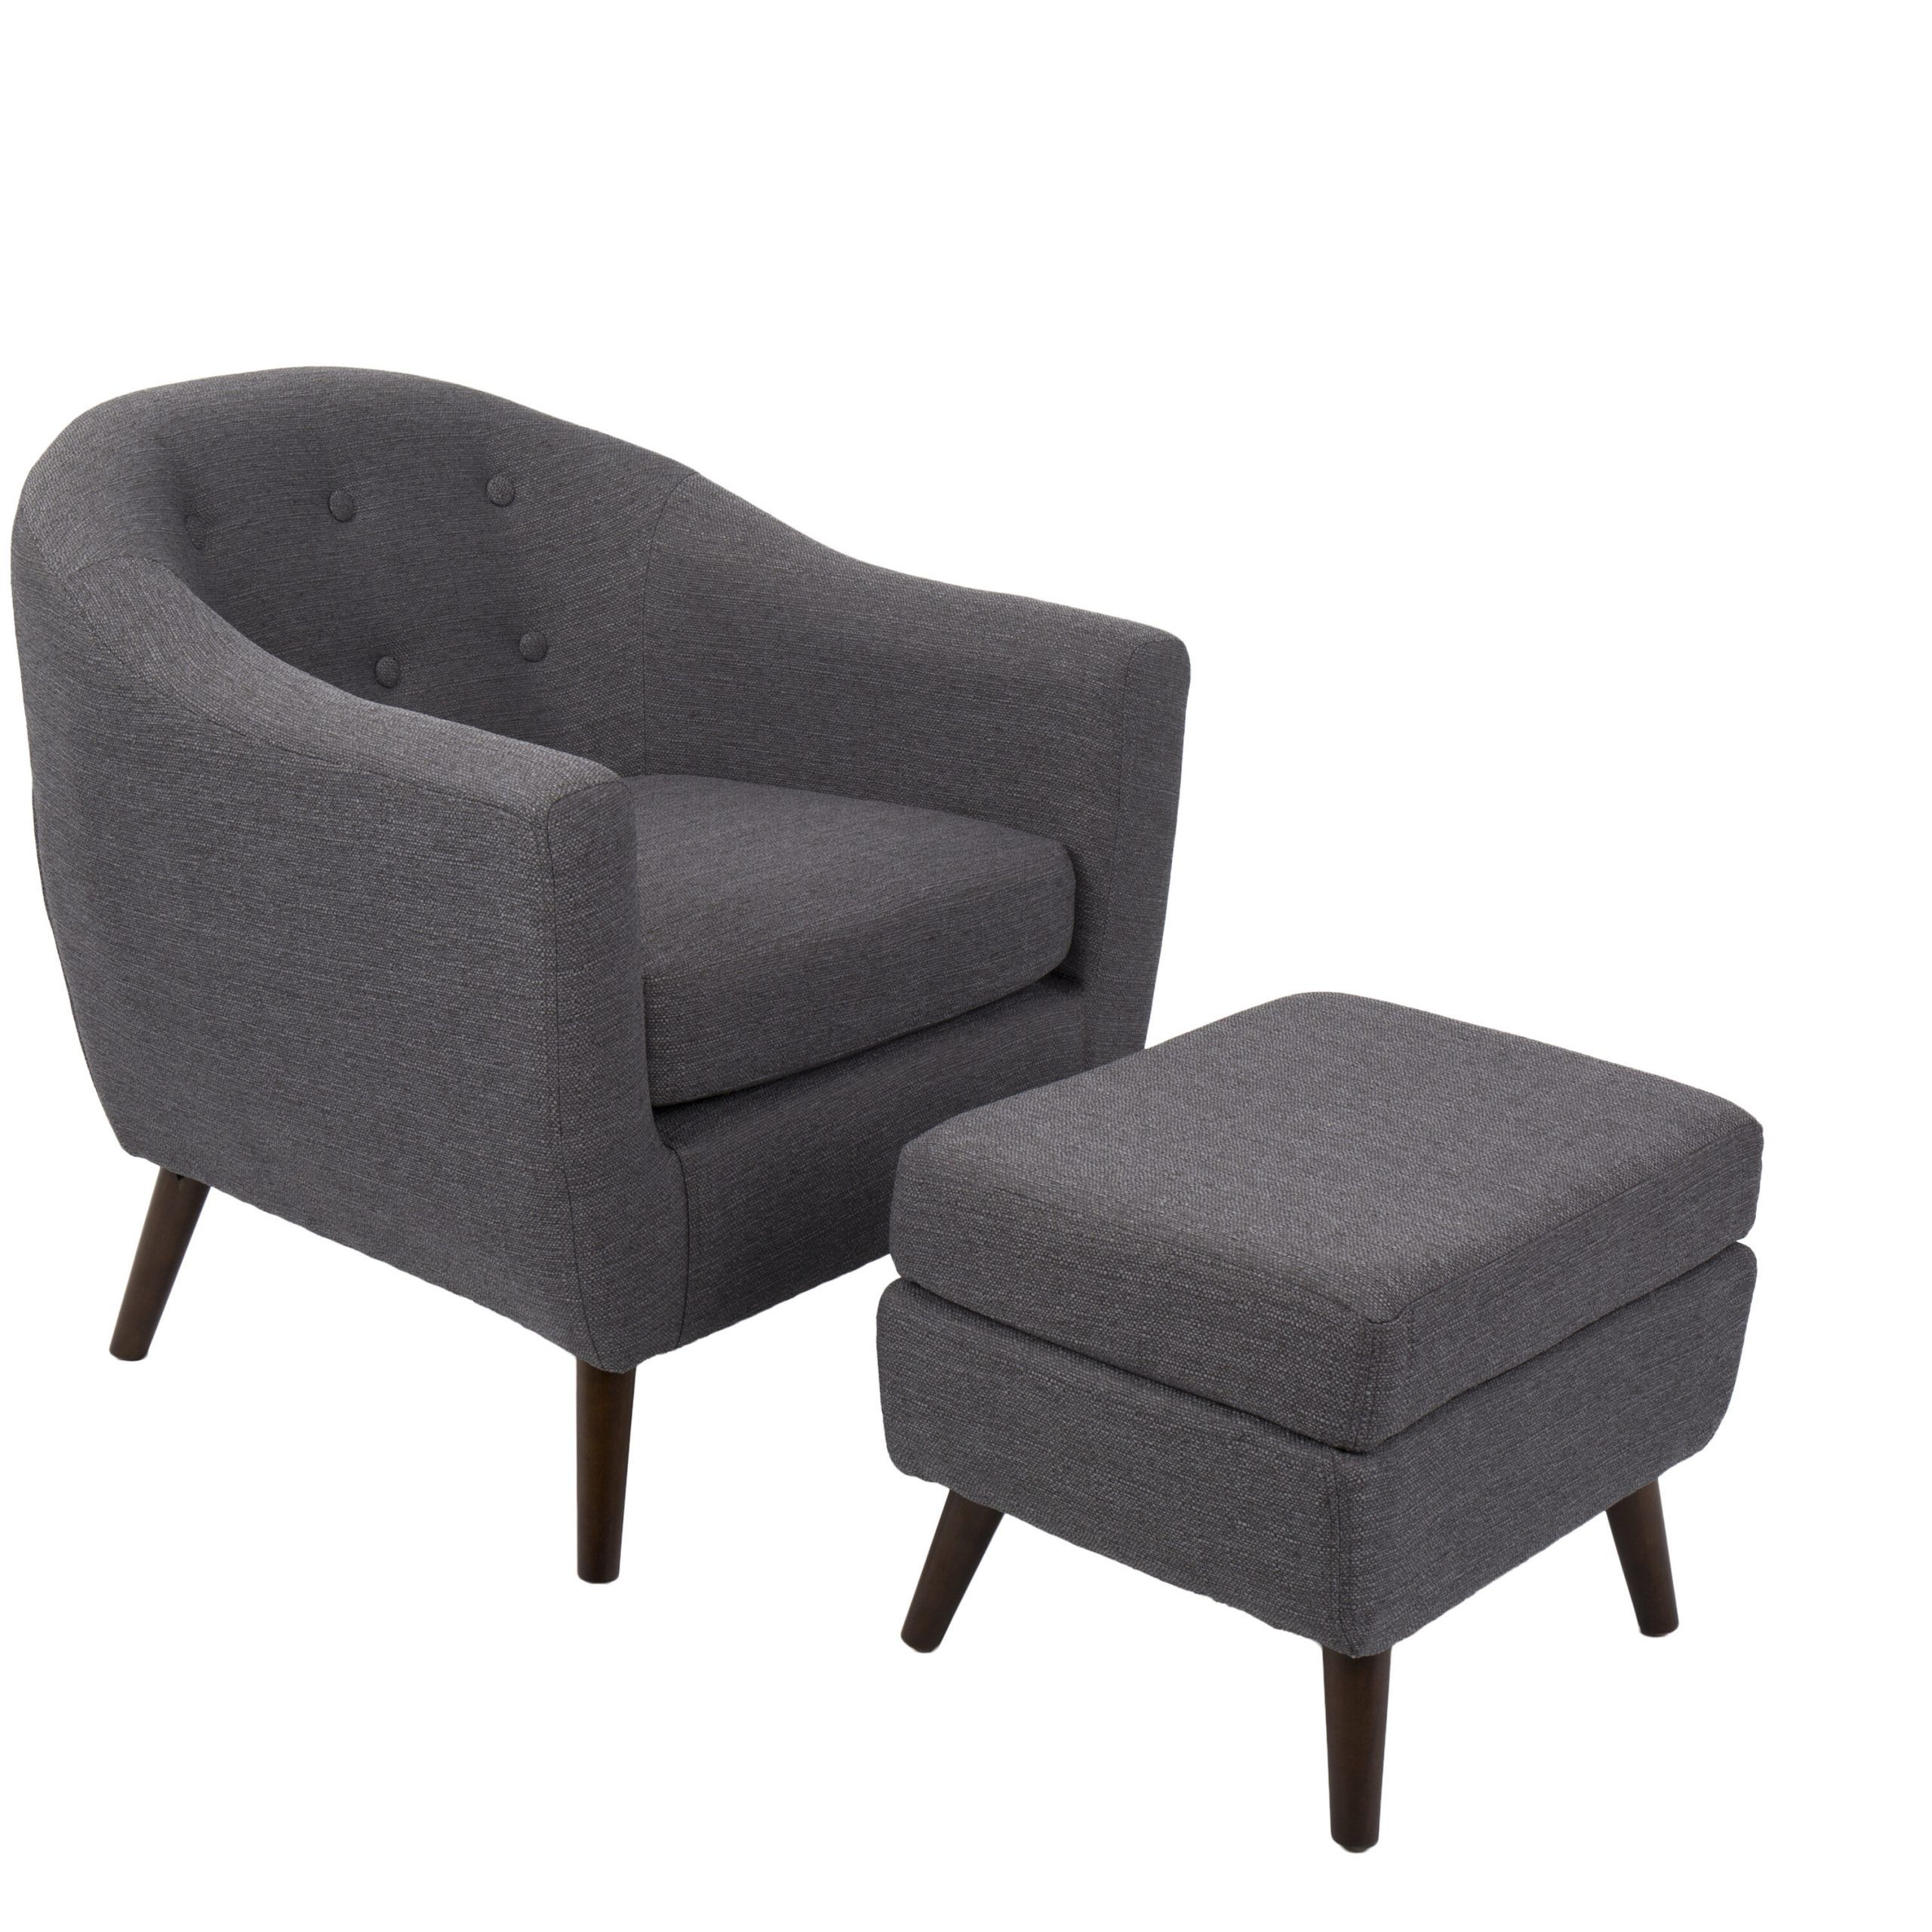 Dario 22" W Polyester Slipper Chair And Ottoman Inside Annegret Faux Leather Barrel Chair And Ottoman Sets (View 7 of 15)